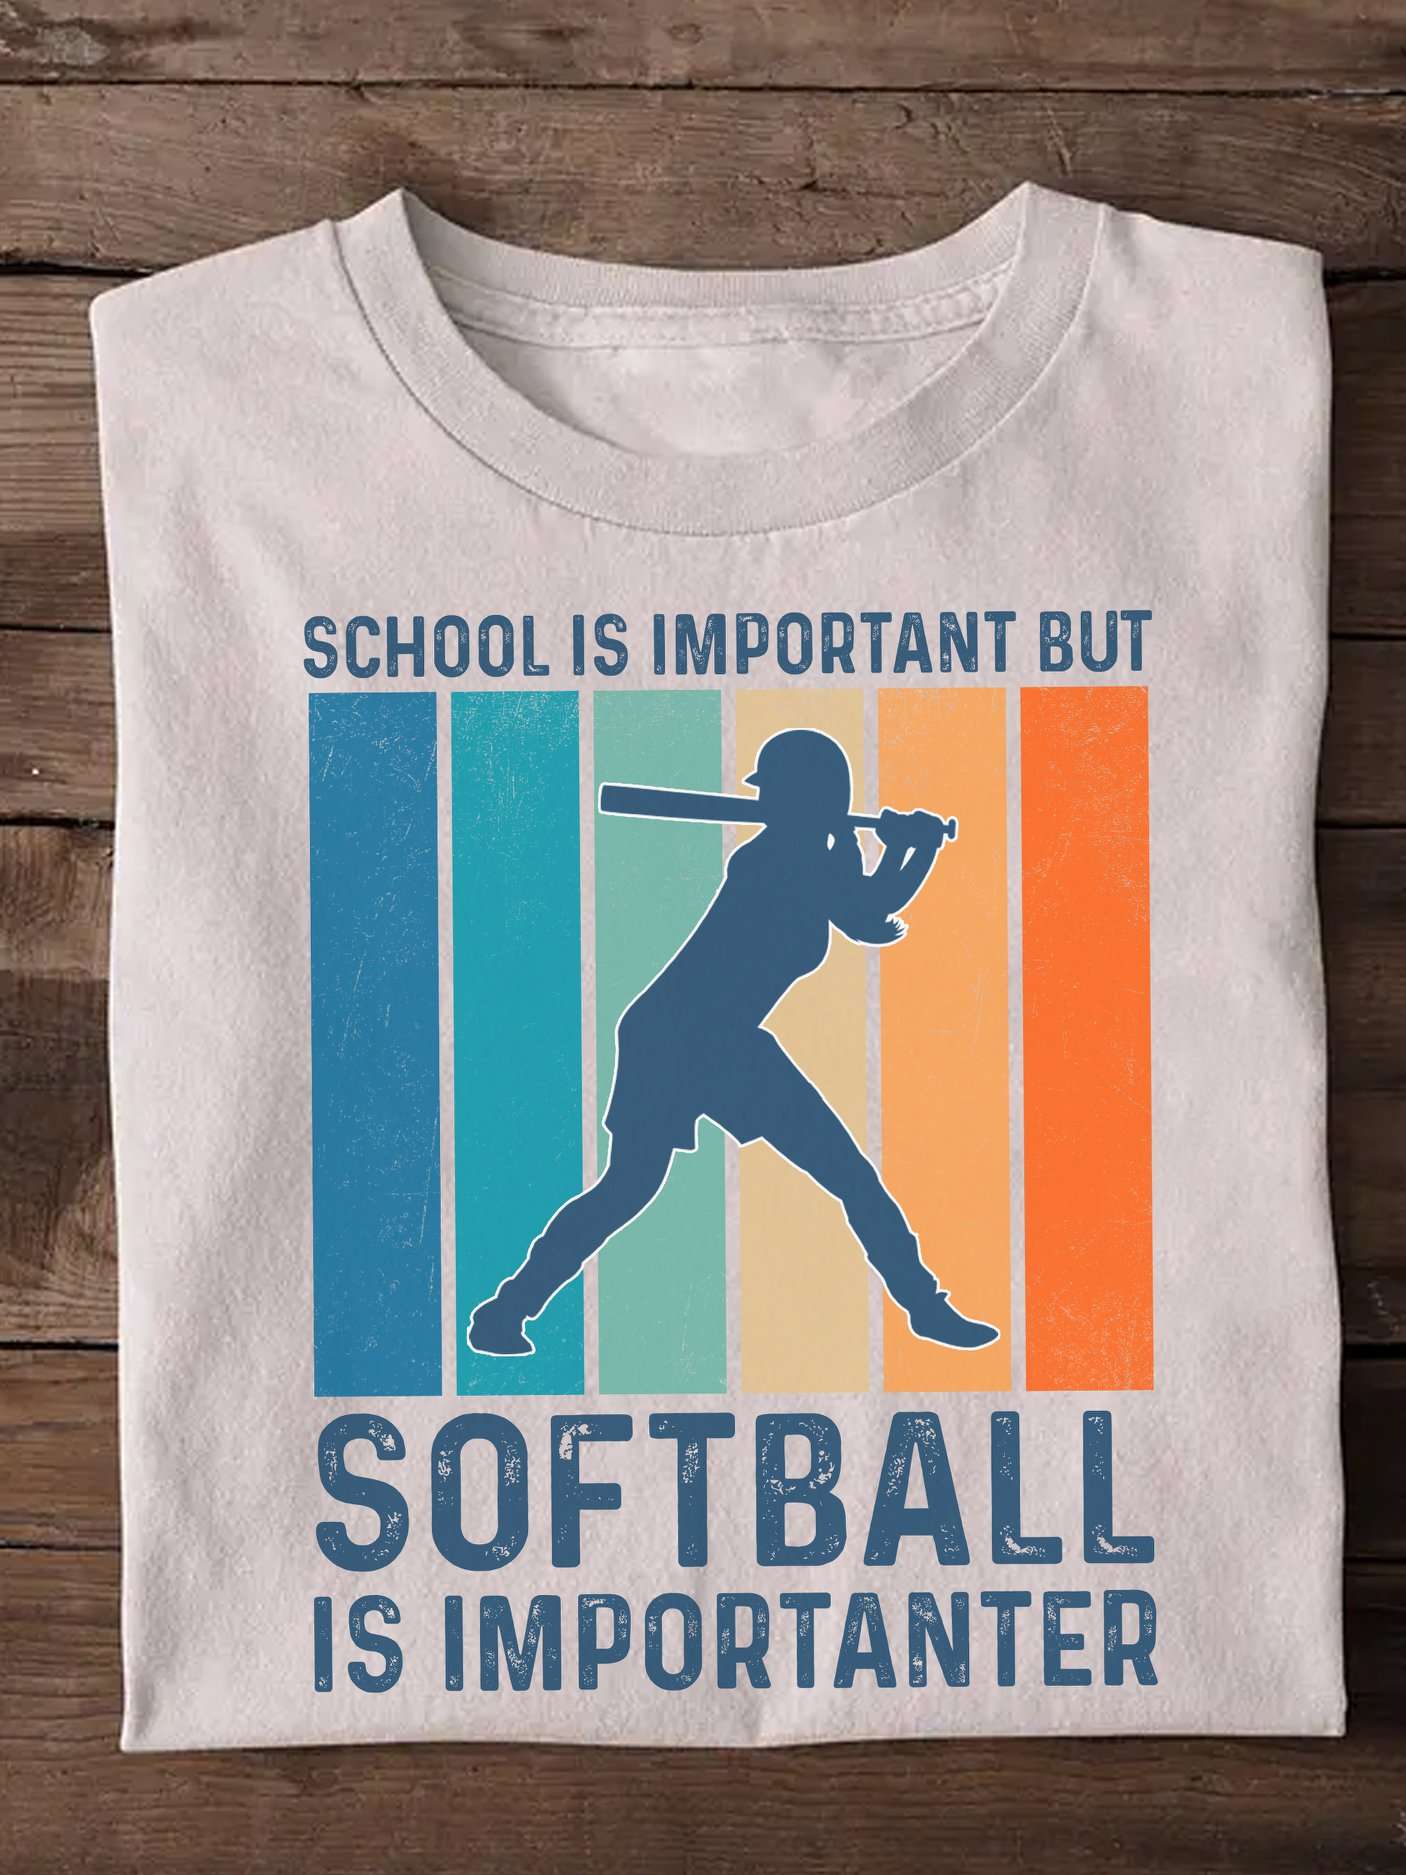 School is important but softball is importanter - Softball girl player